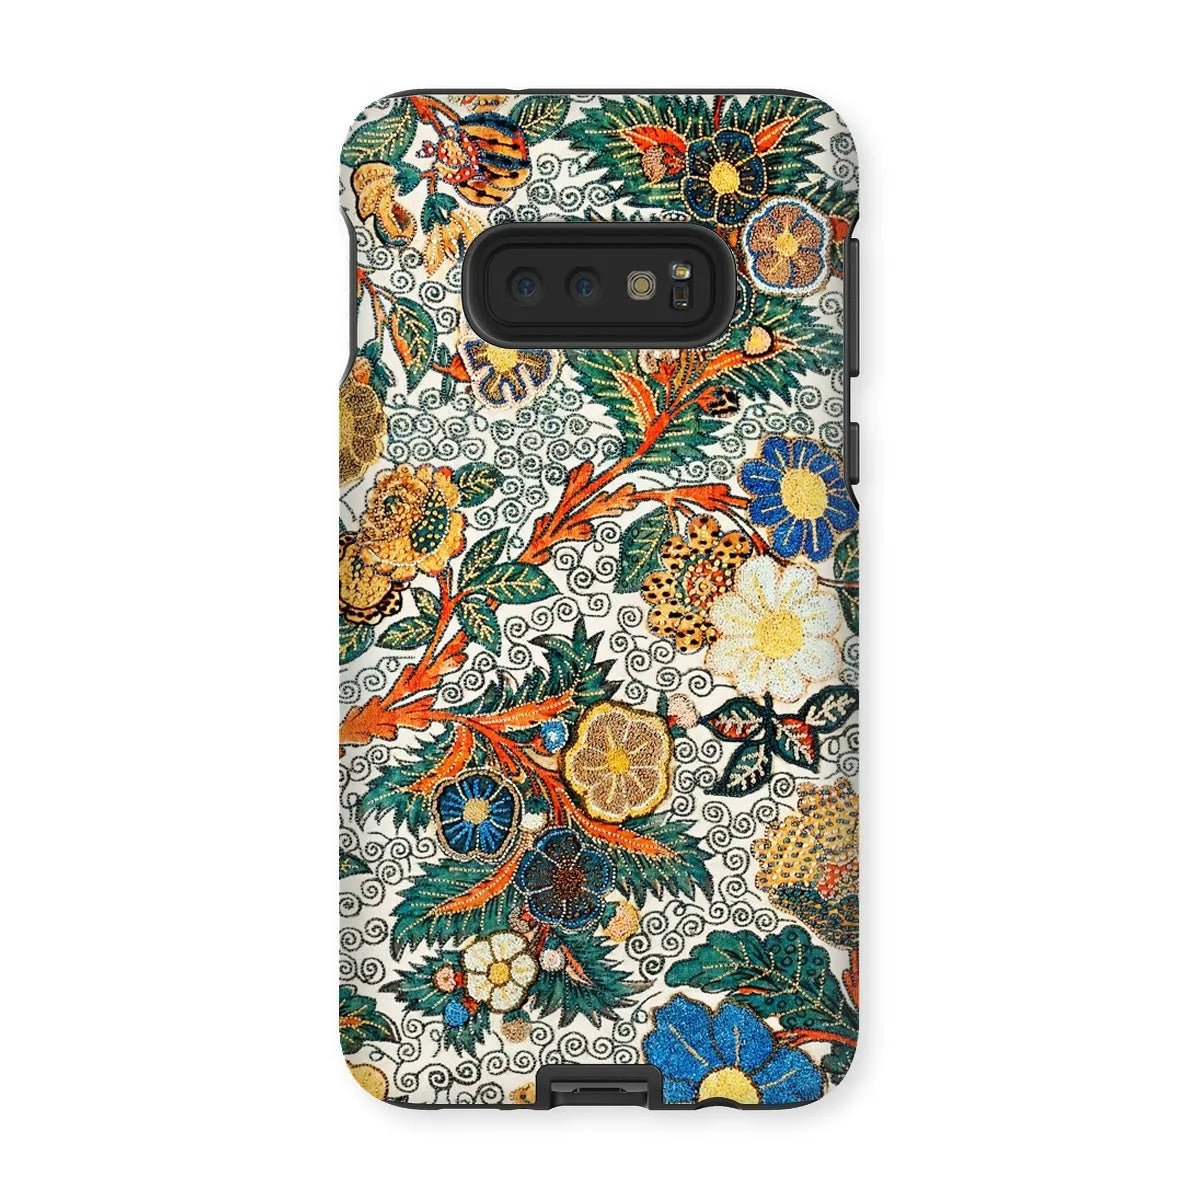 Blossomewhere Japanese Tapestry Art Phone Case - Samsung Galaxy S10e / Matte - Mobile Phone Cases - Aesthetic Art